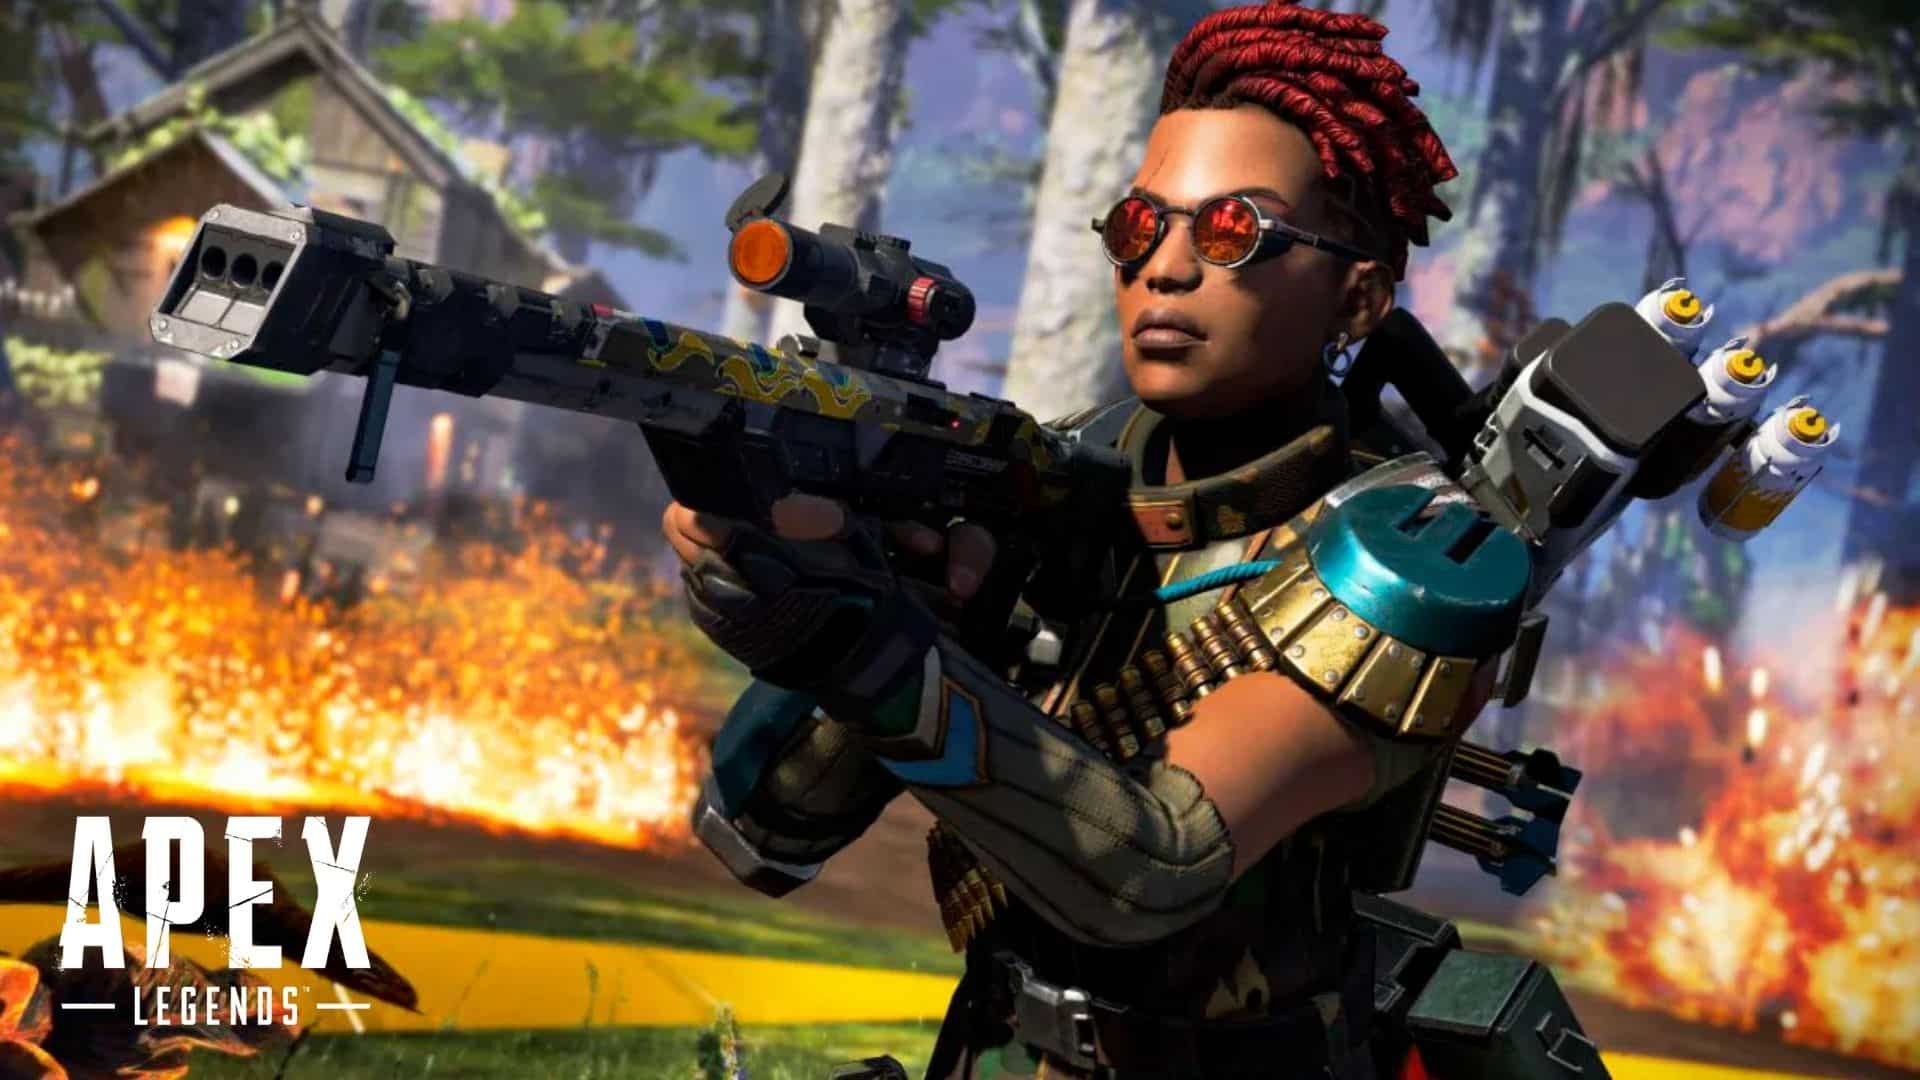 Bangalore in Apex Legends with a weapon surrounded by fire